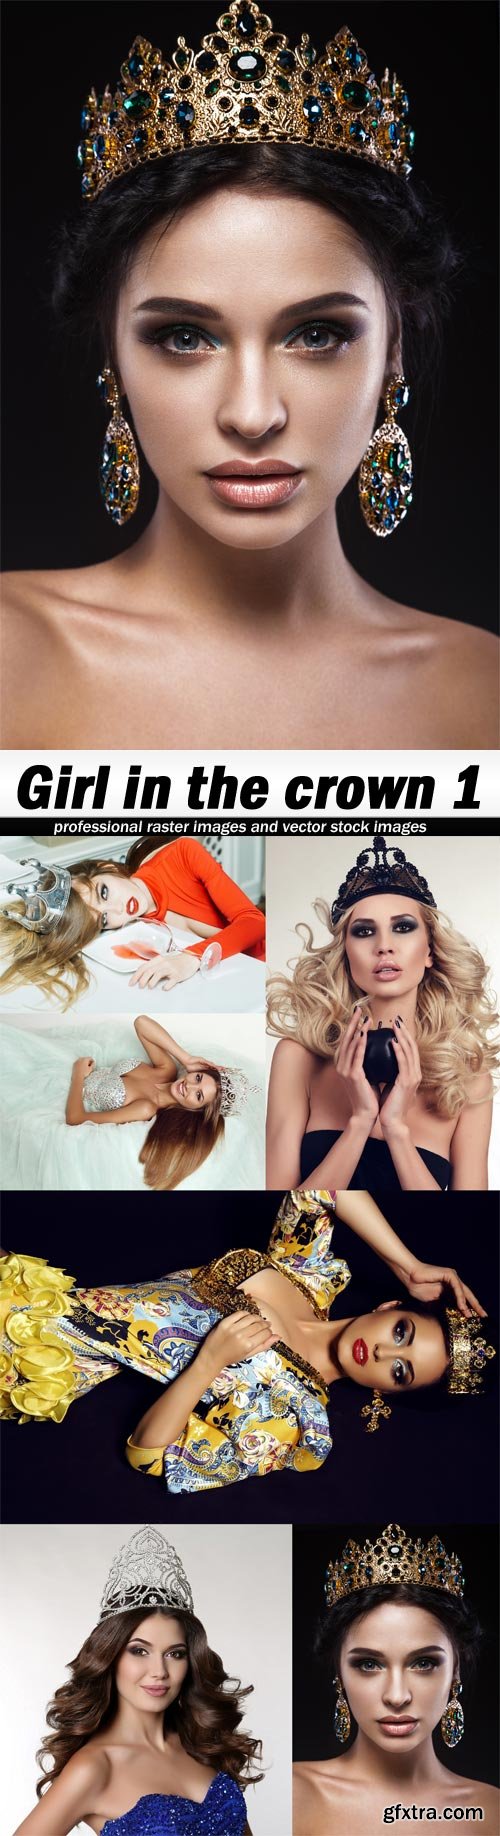 Girl in the crown 1